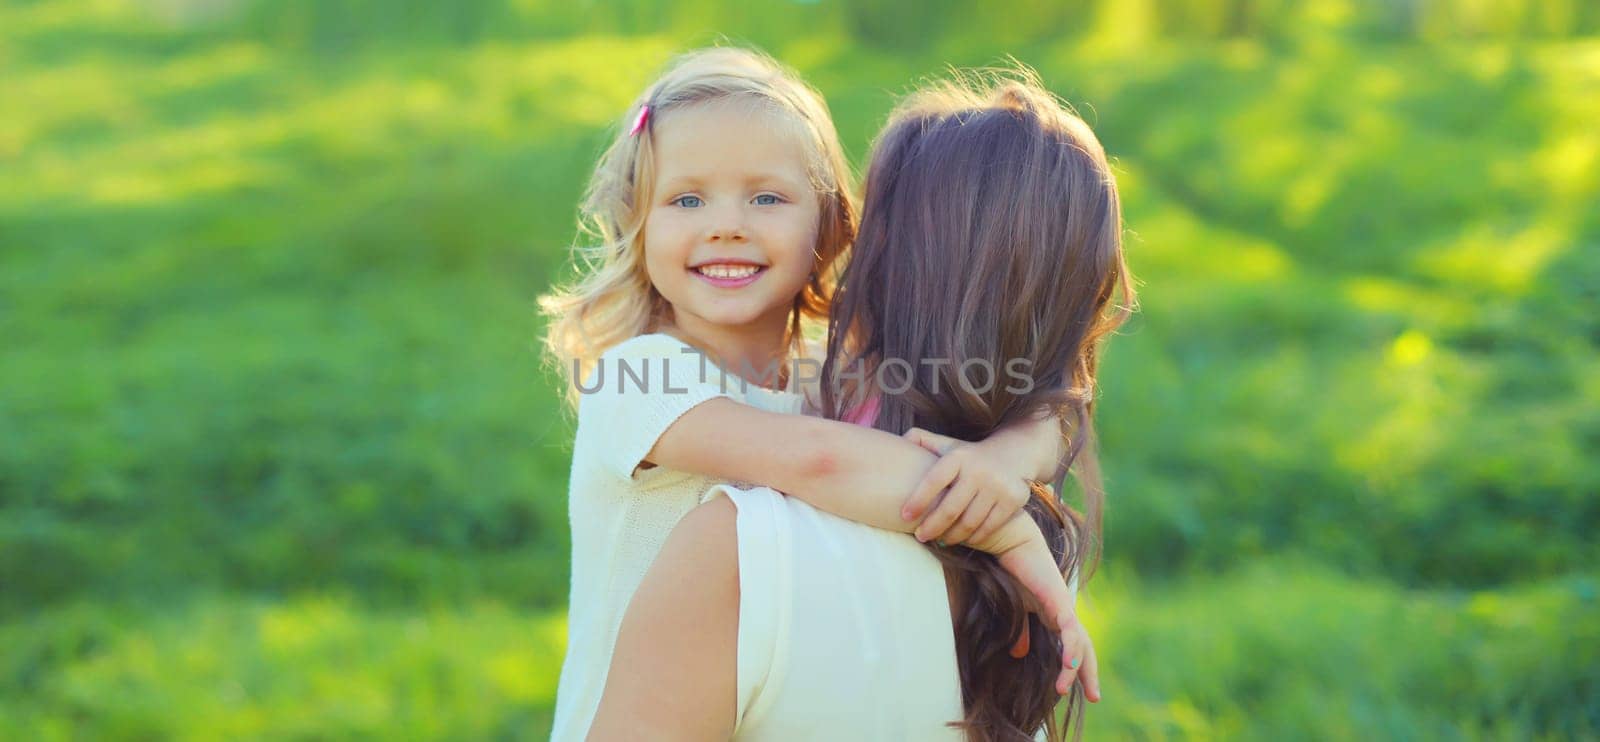 Portrait of happy cheerful smiling mother with little girl child daughter on the grass in sunny summer park